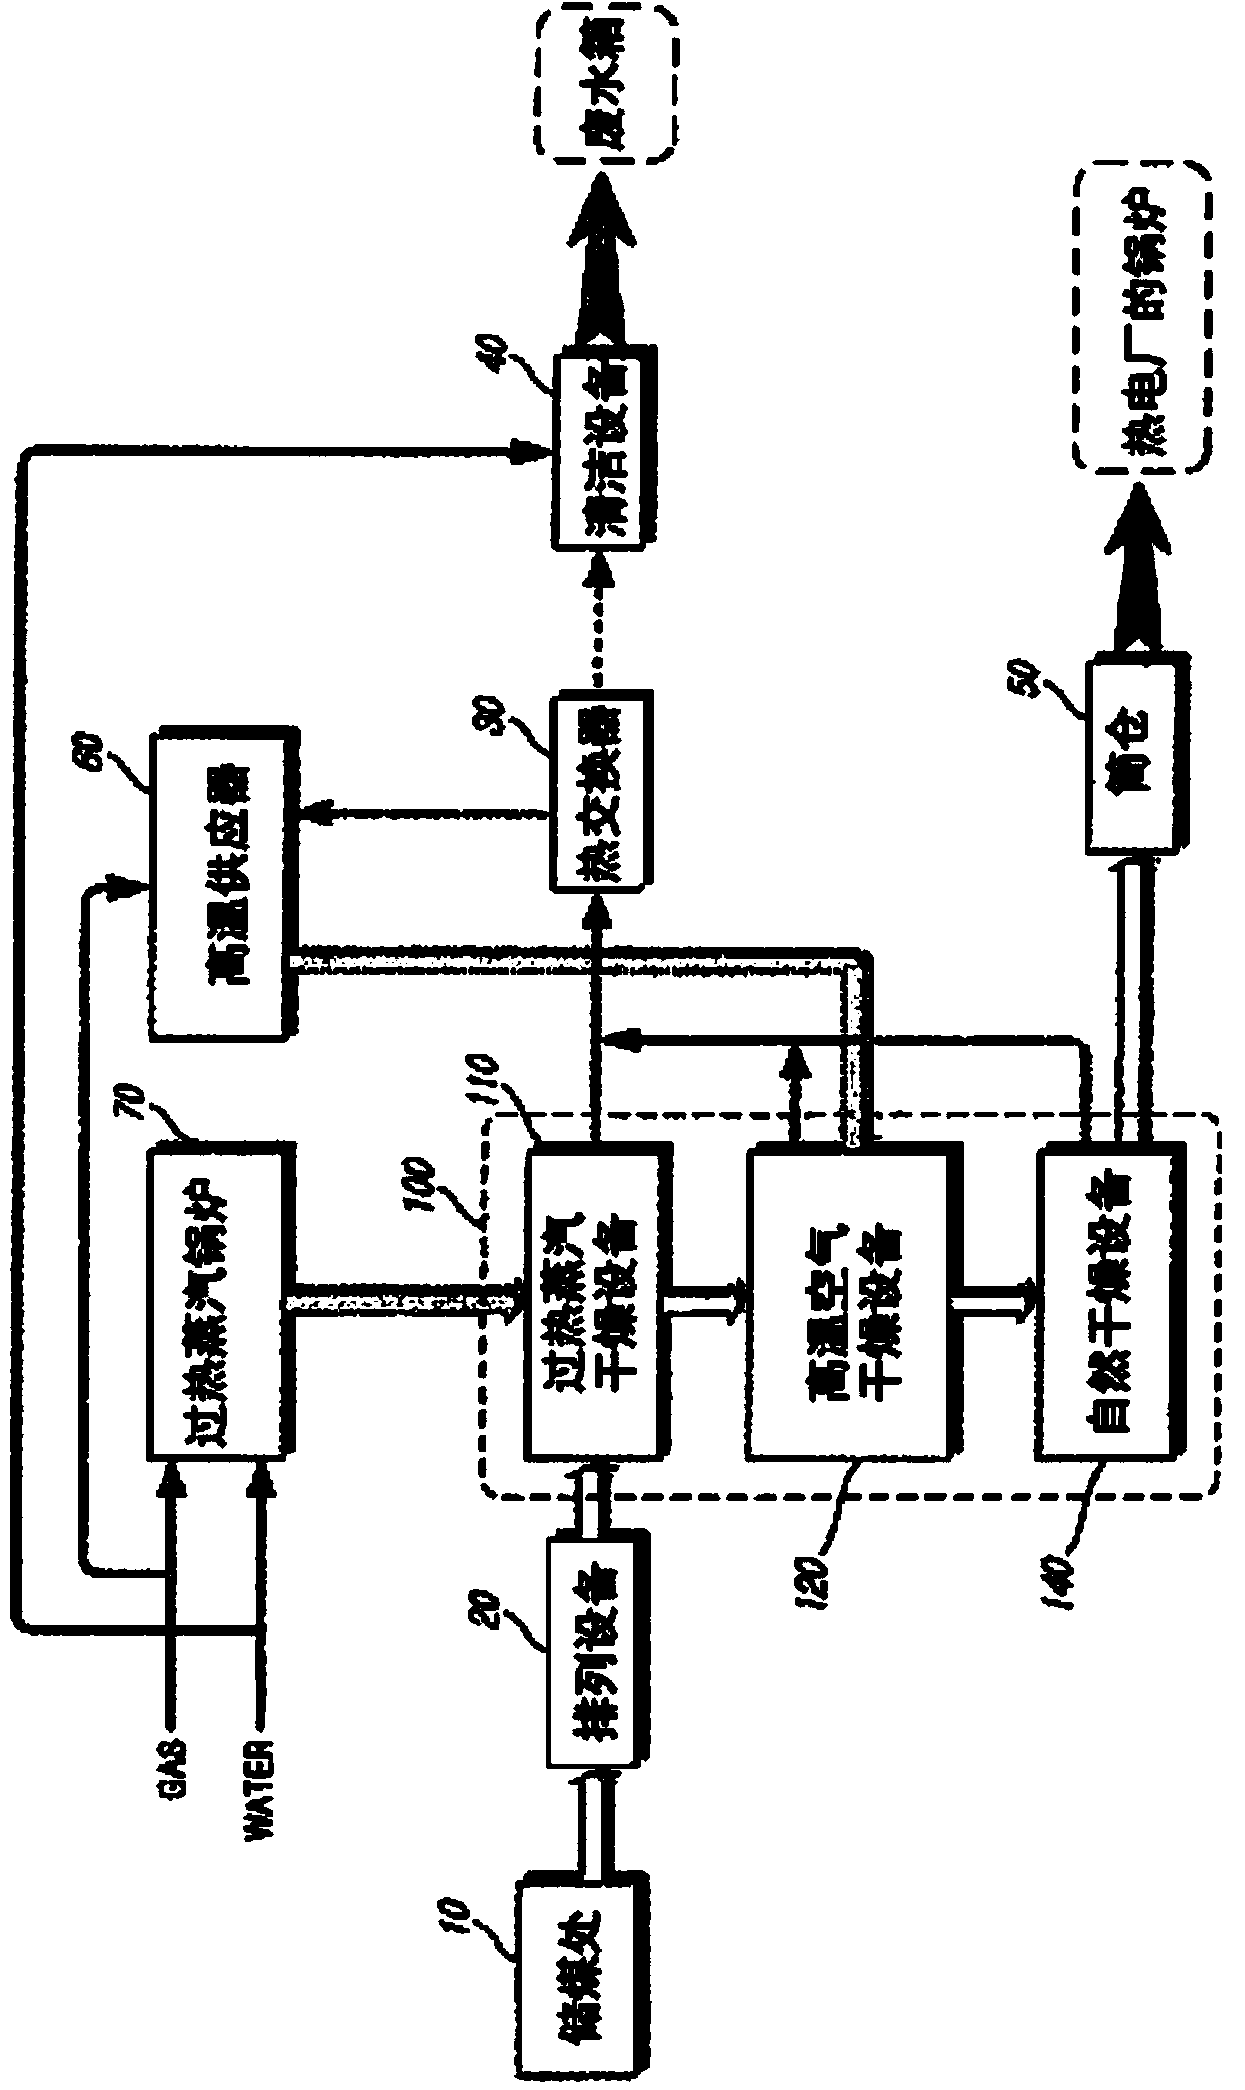 System for drying coal by using superheated steam